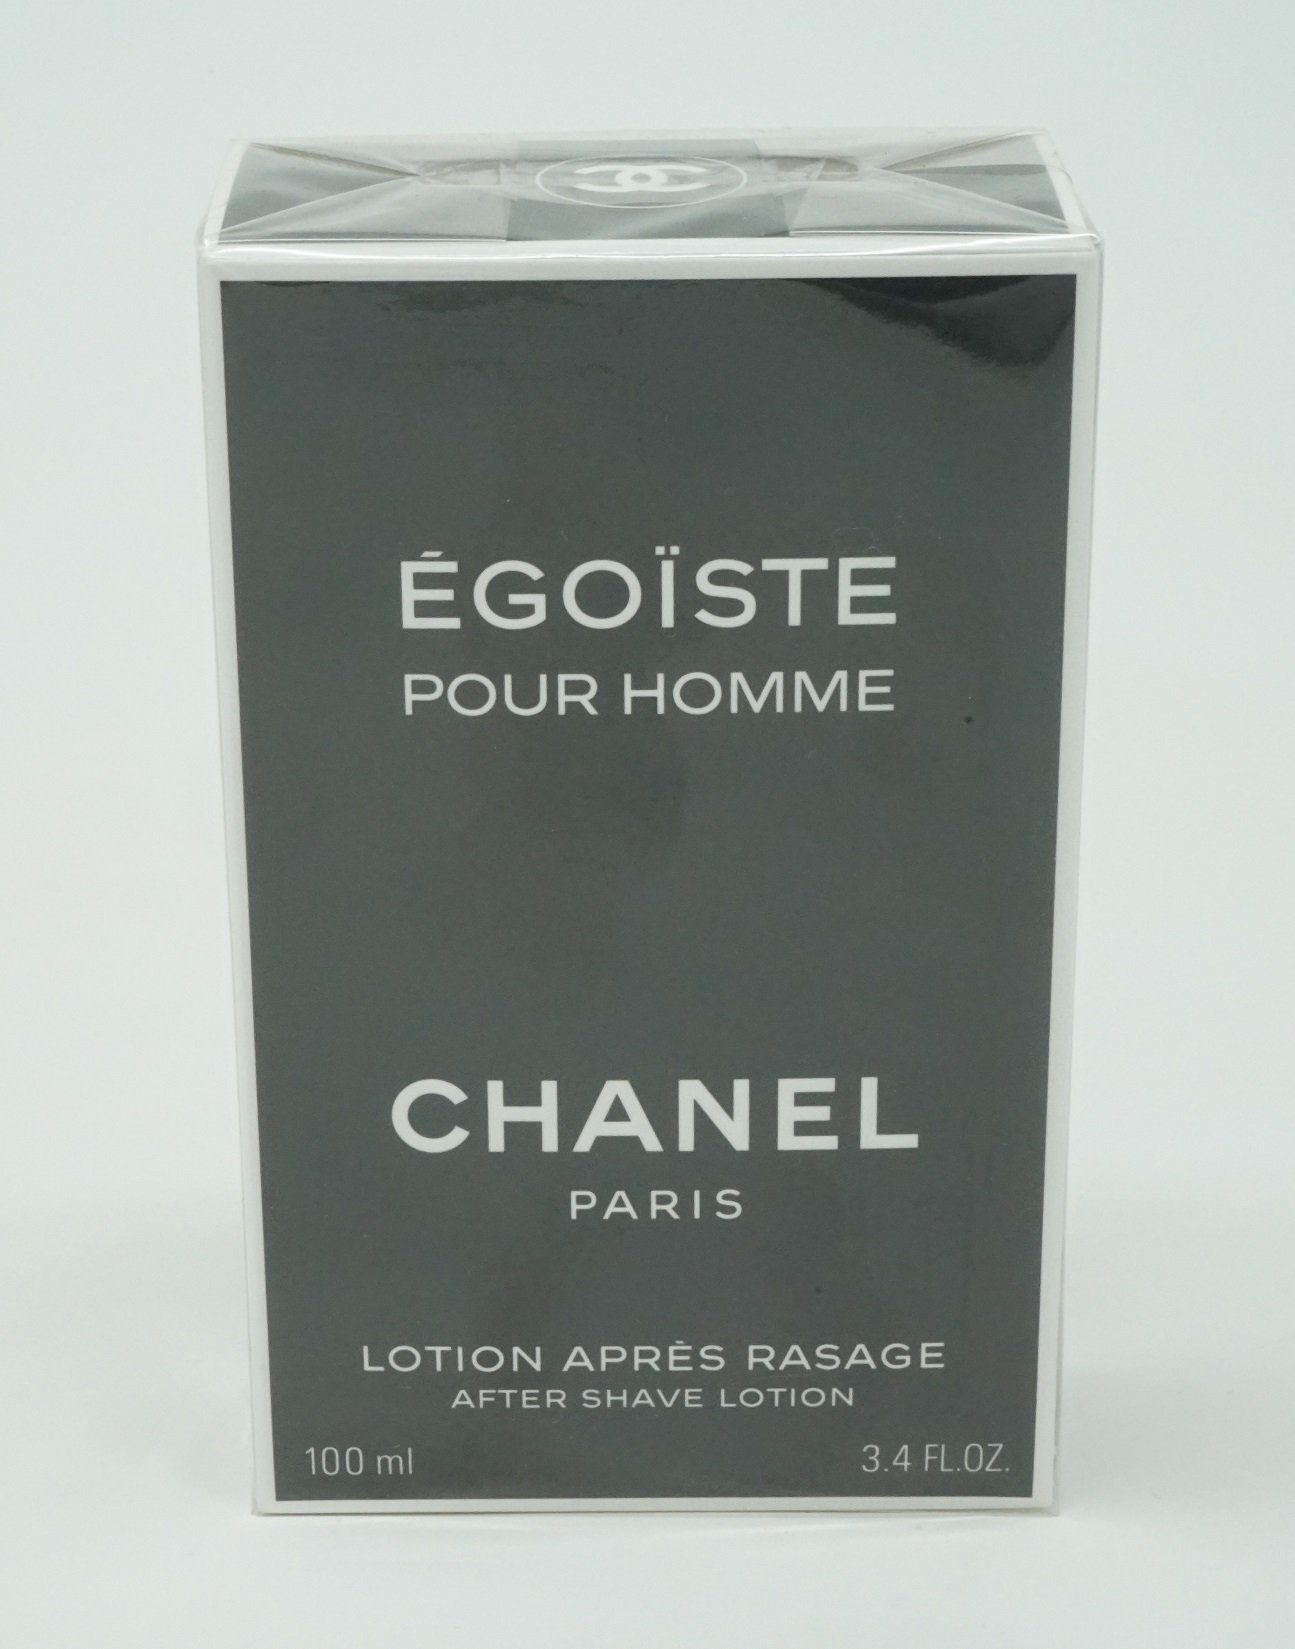 CHANEL After Shave Lotion Chanel Egoiste Pour Homme After Shave Lotion 100ml